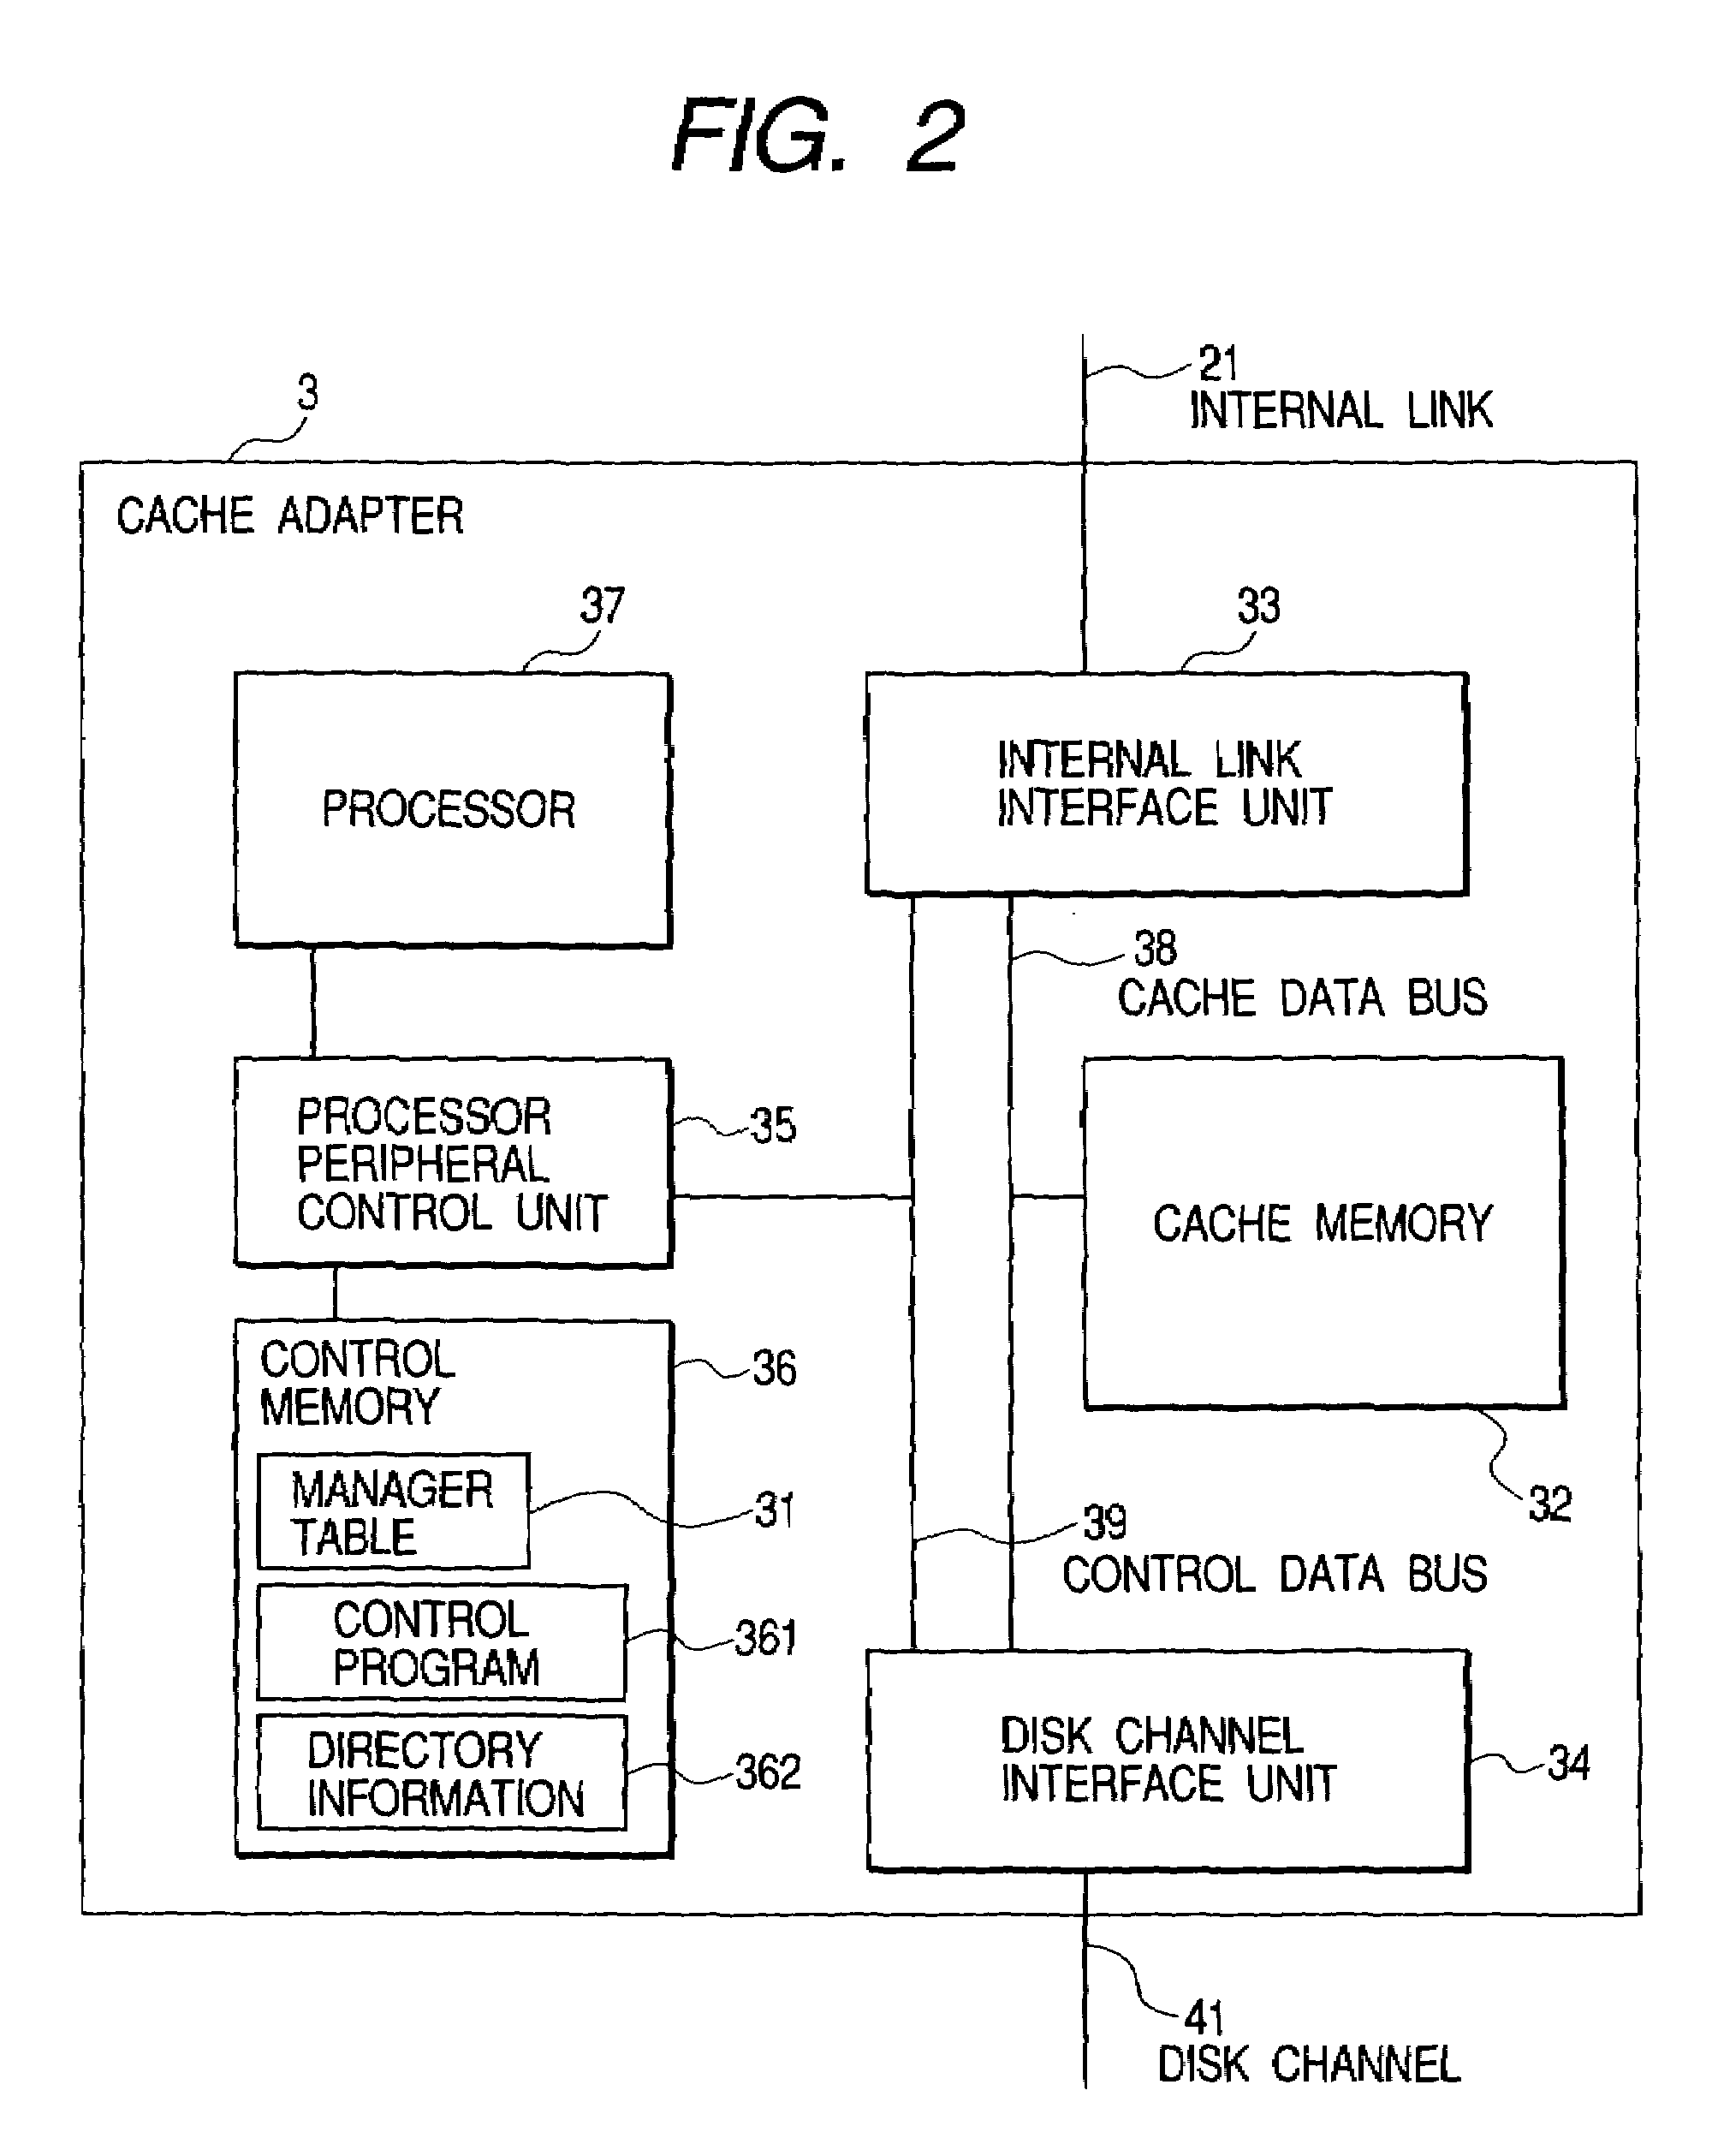 Storage system including multiple control units for increased reliability during a failure